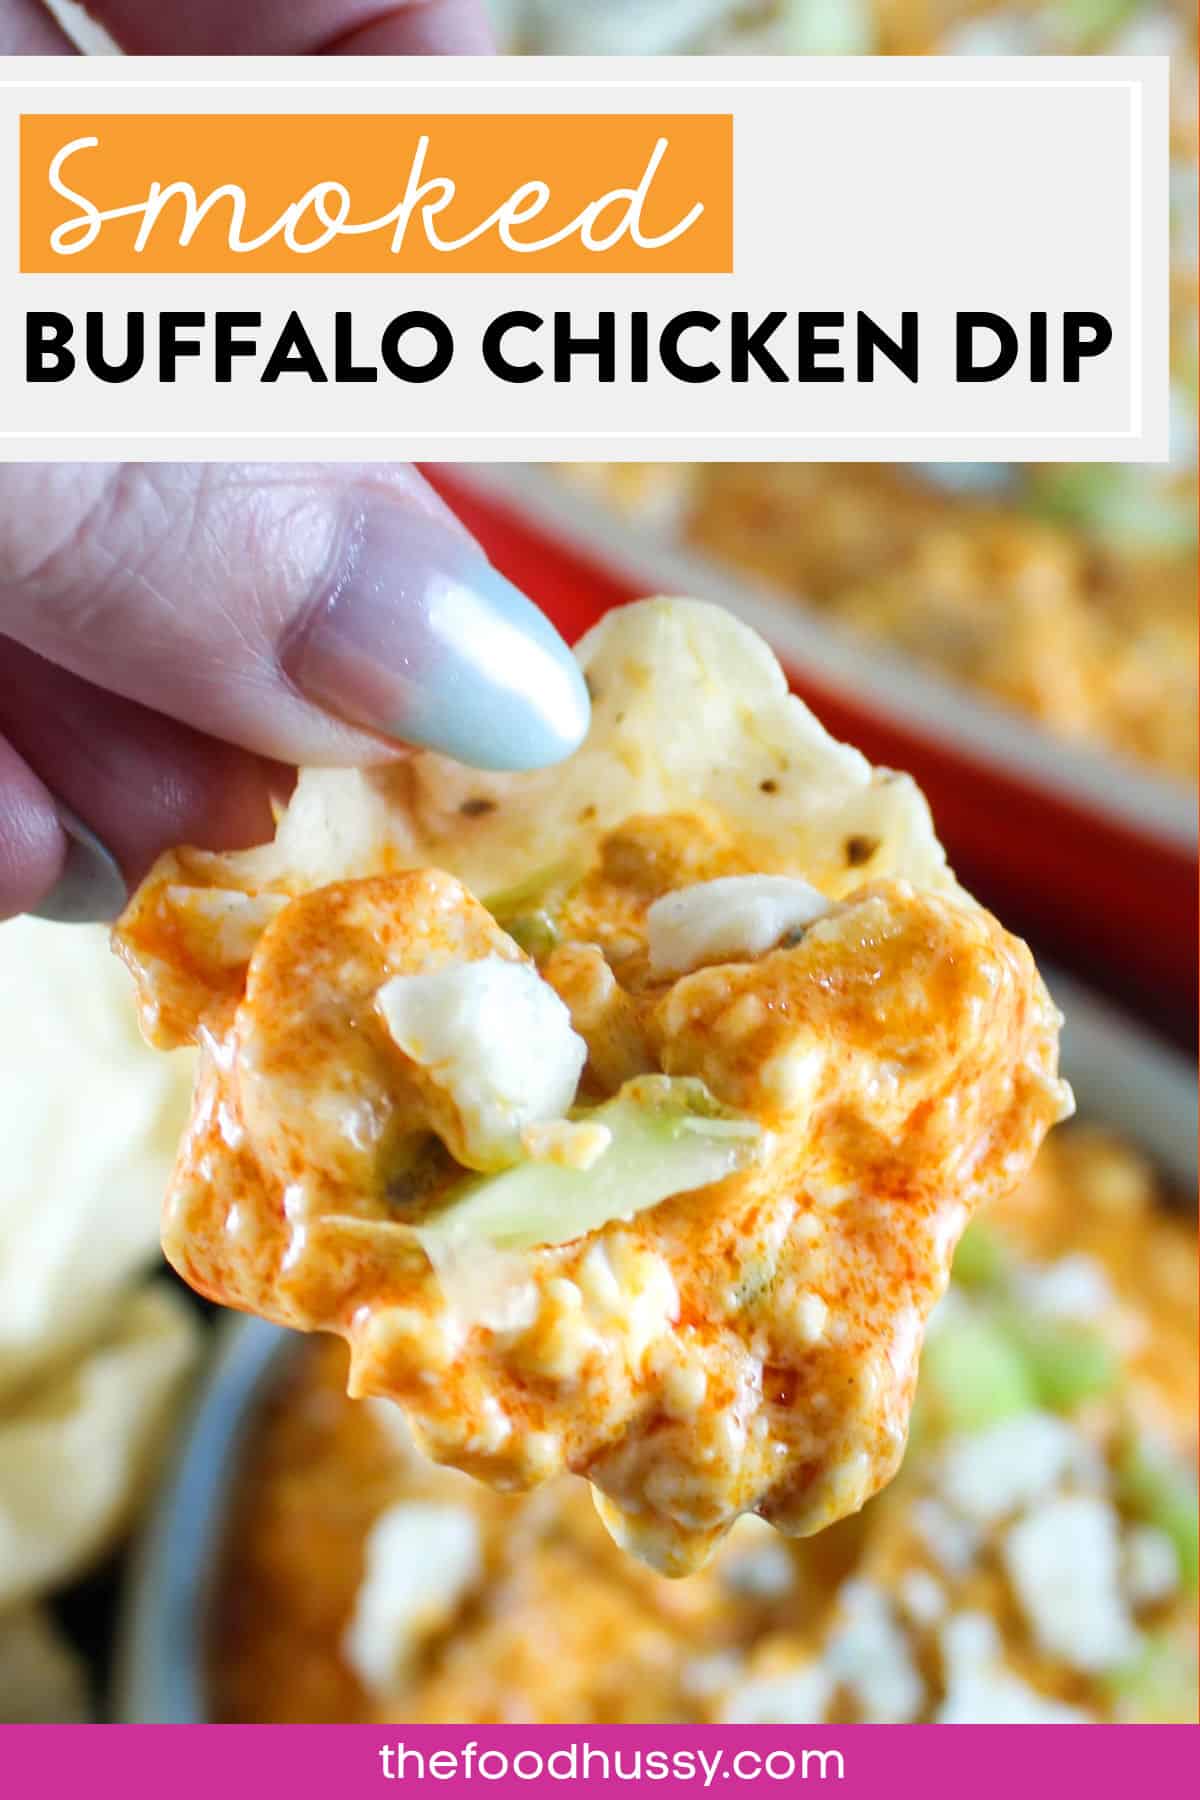 This Smoked Buffalo Chicken Dip is everything you love - cheesy, spicy, zingy, crunchy and just plain delicious! This spicy chicken dip is the favorite for every party!  via @foodhussy